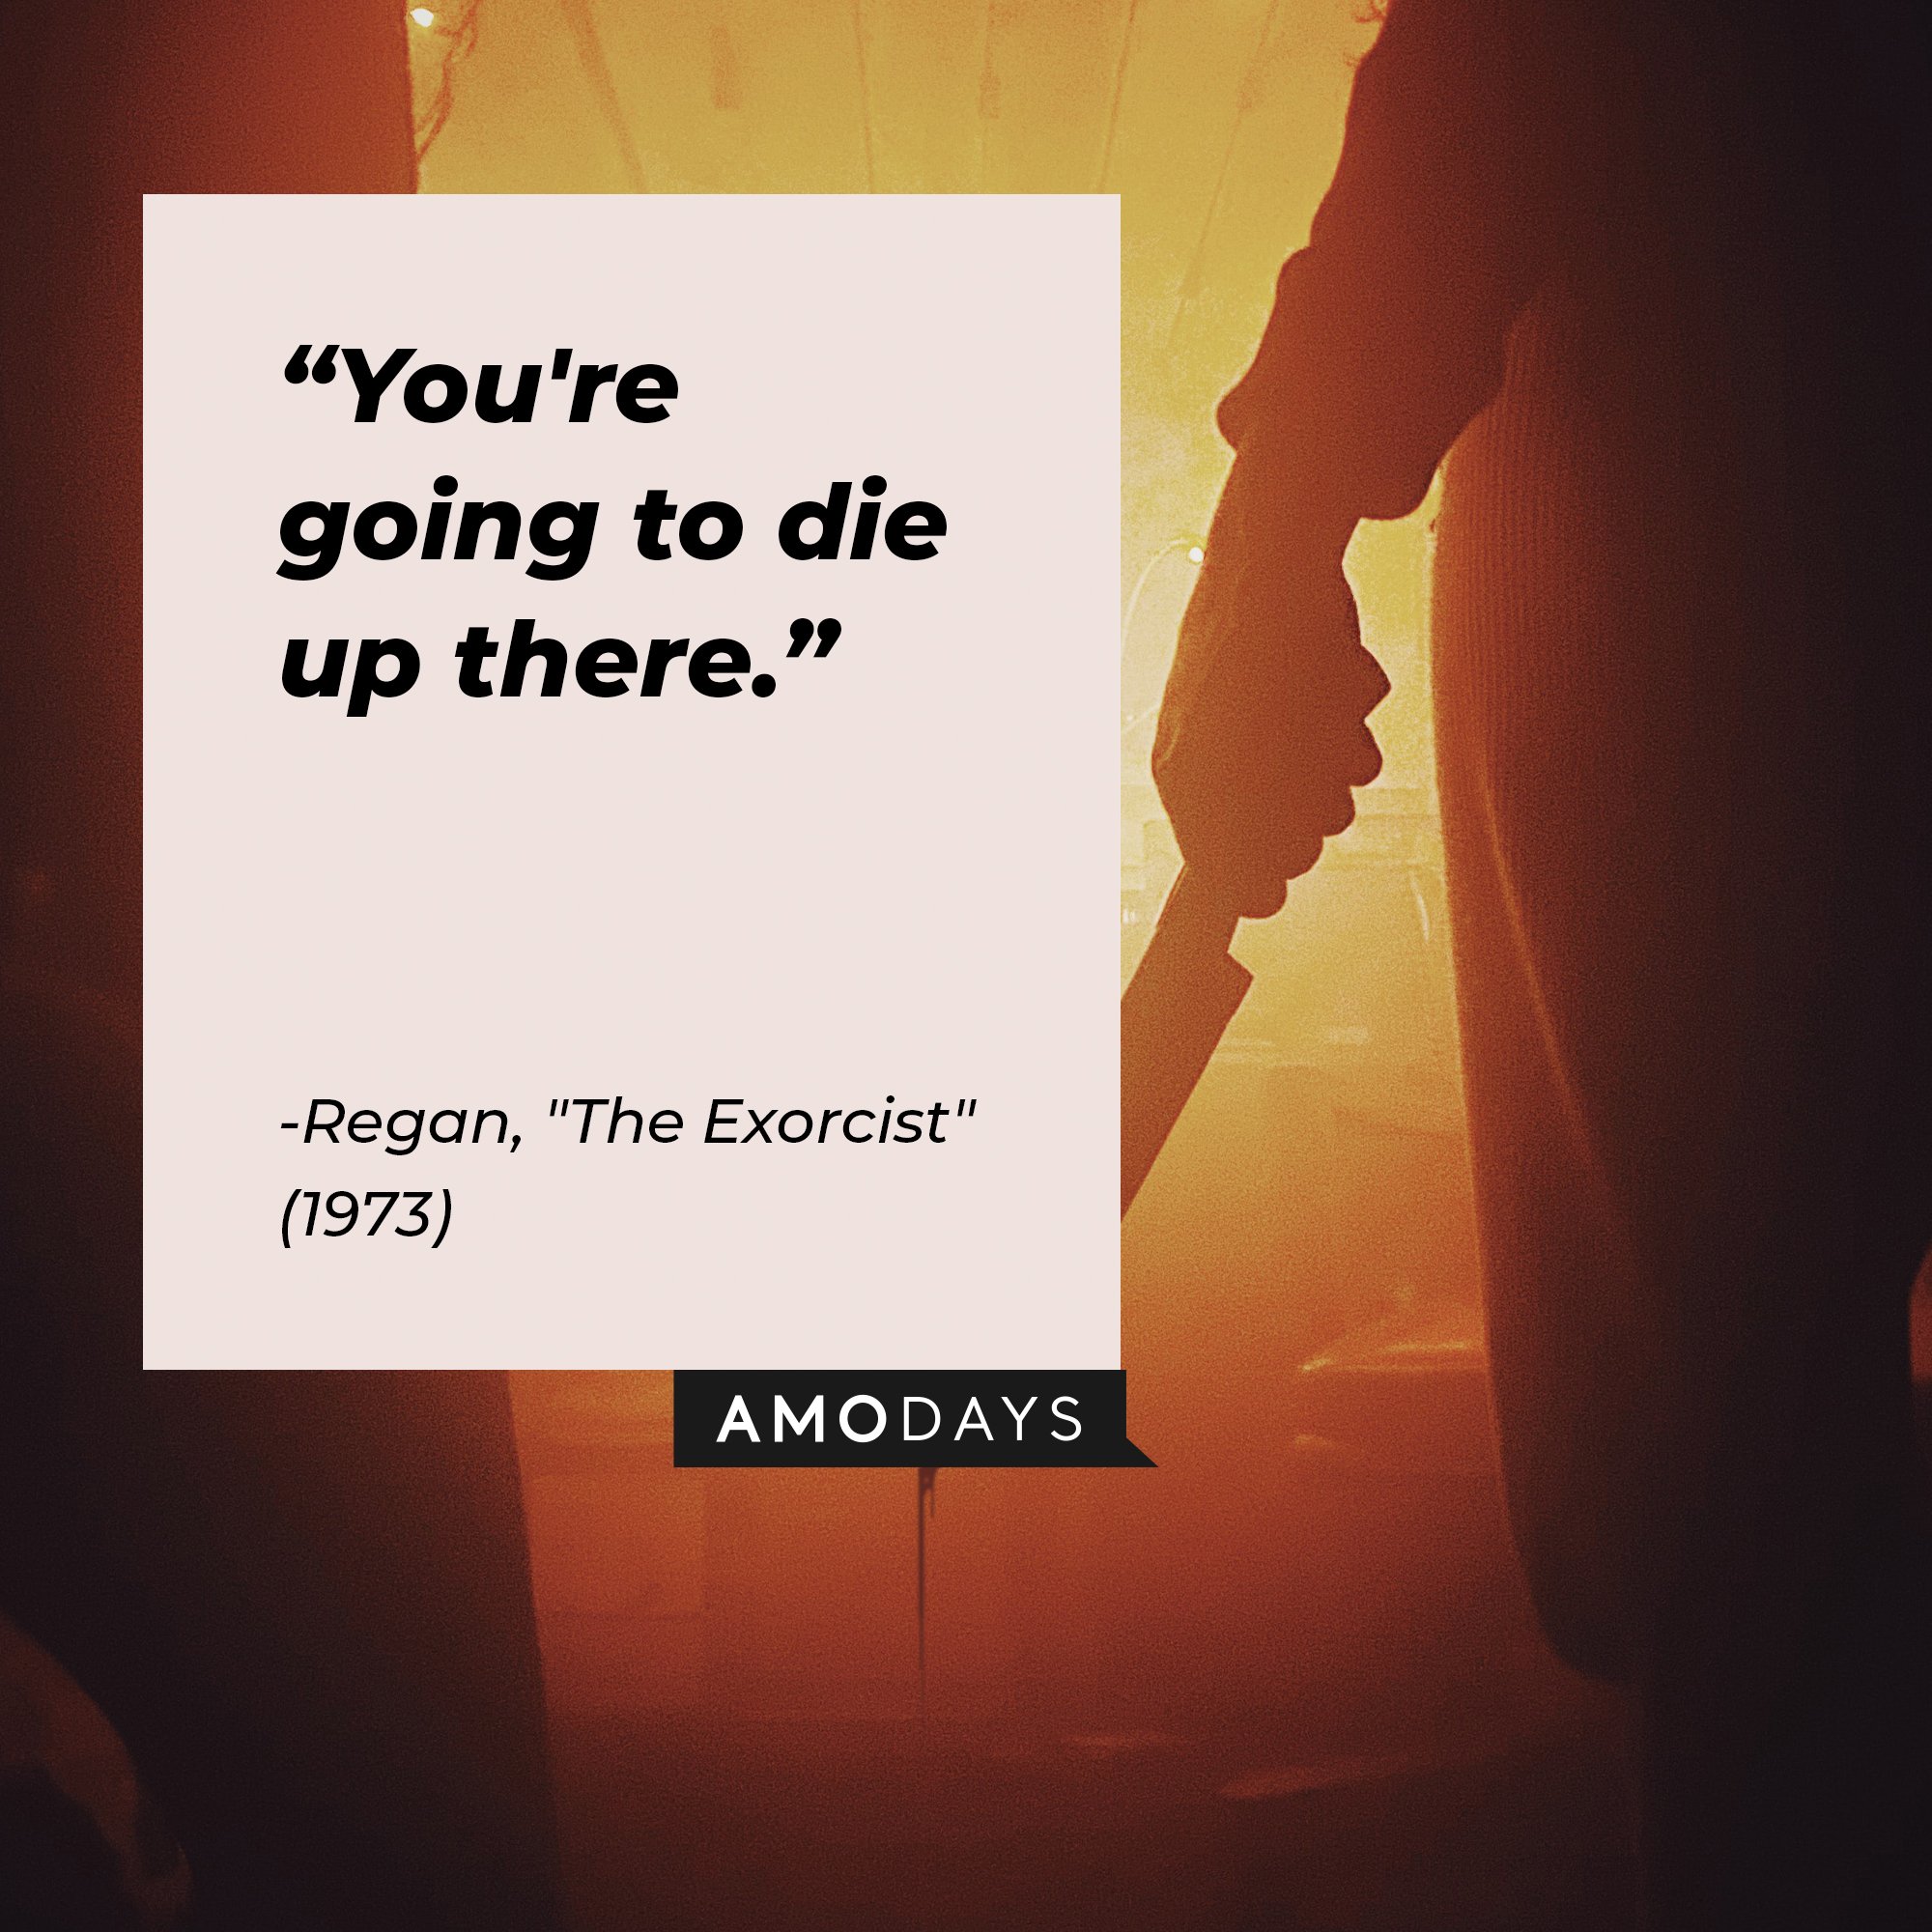  Regan’s quote from “The Exorcist" (1973) "You're going to die up there." | Image: AmoDays